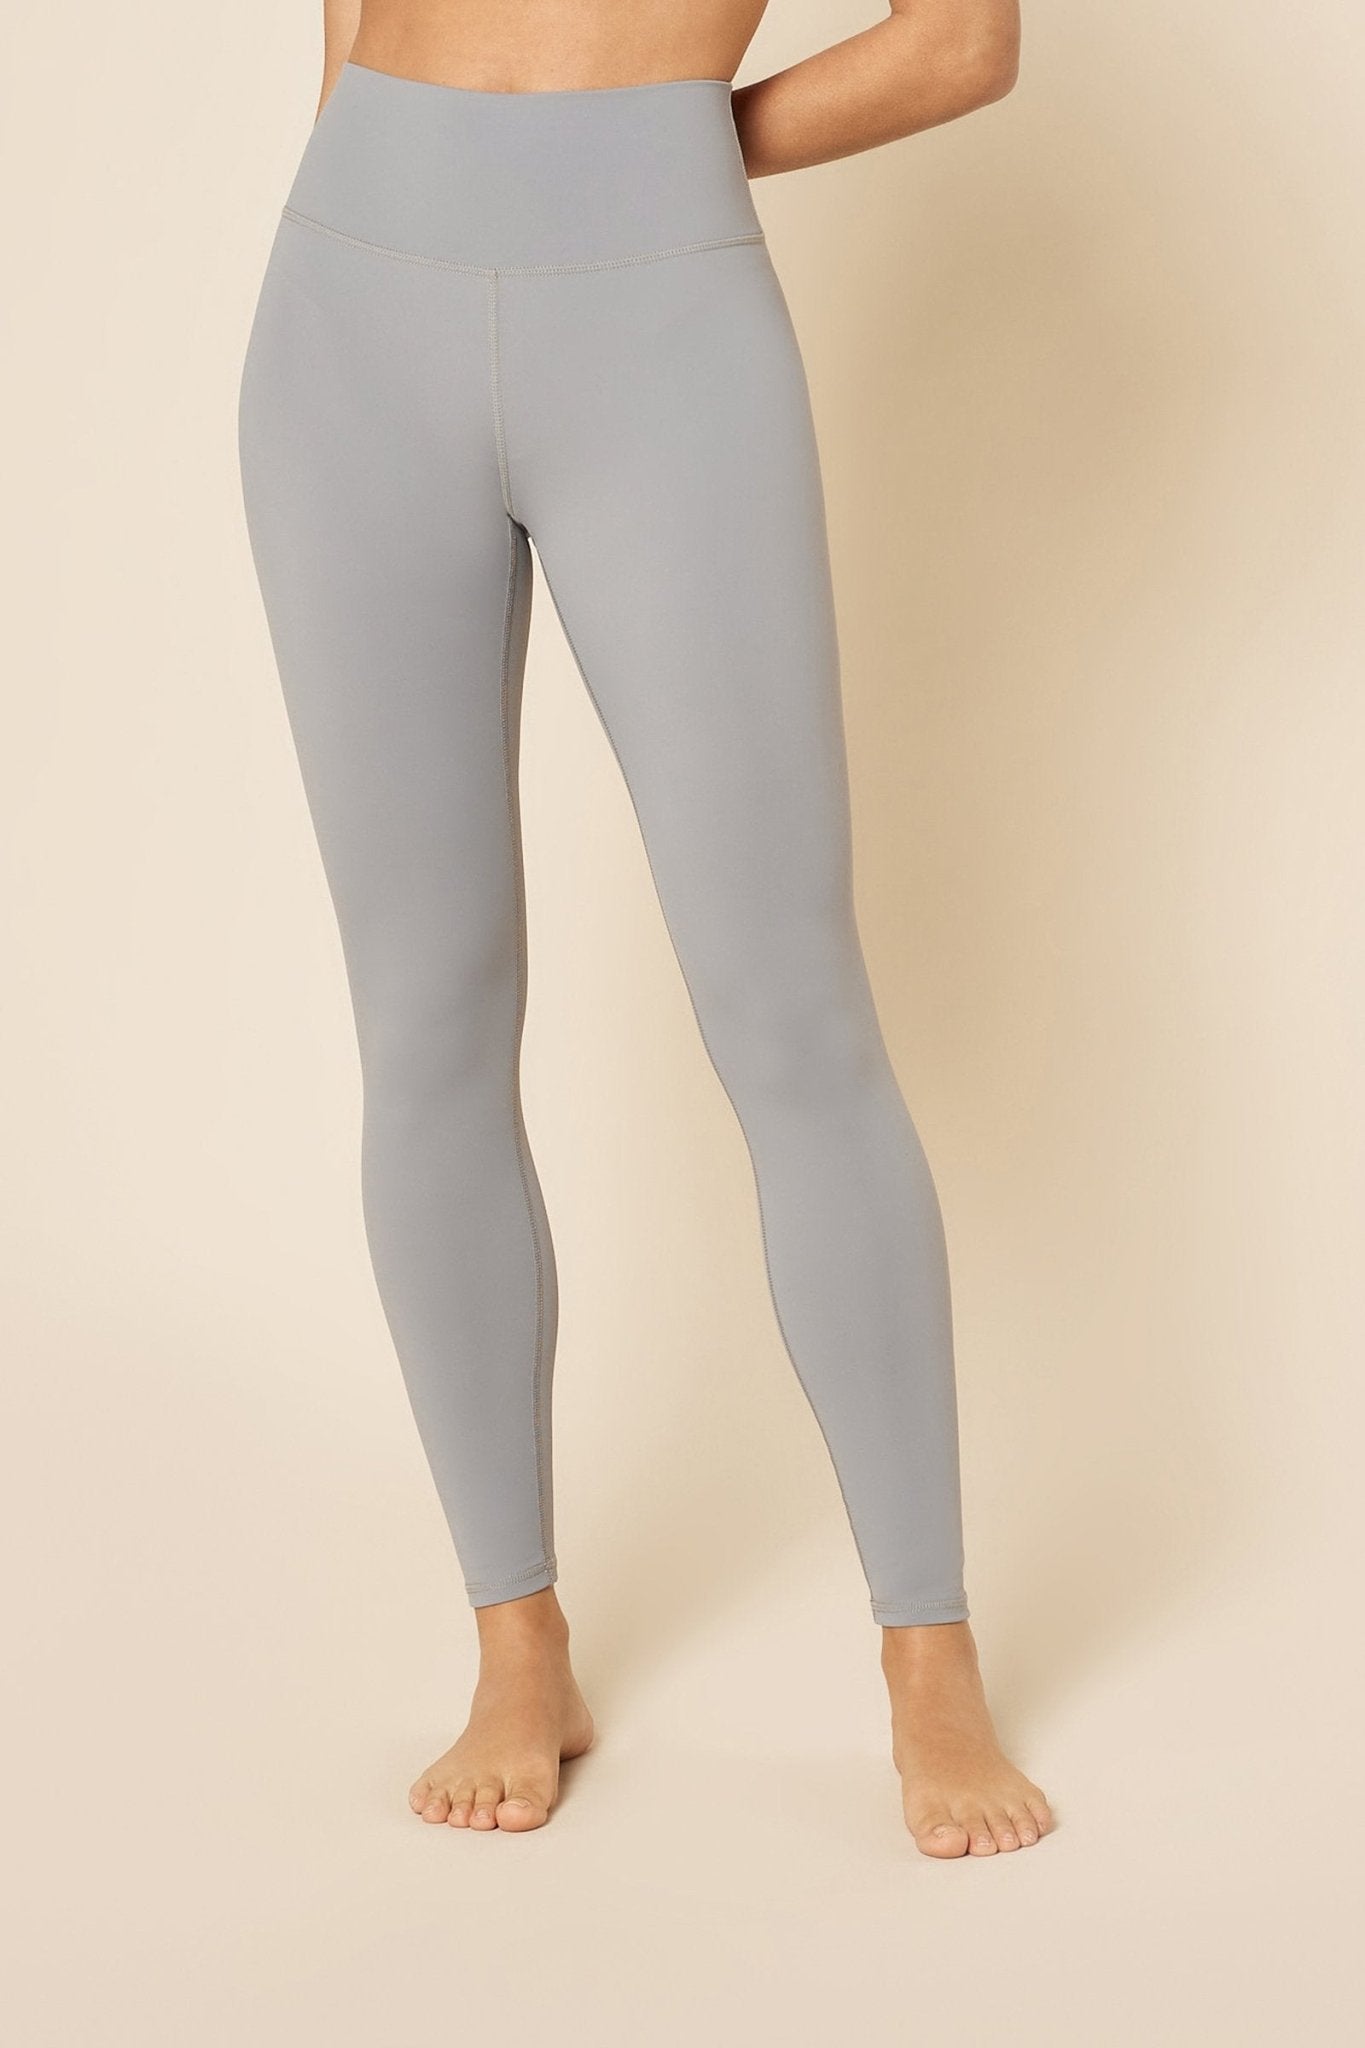 NUDE ACTIVE FULL LENGTH TIGHTS | NUDE LUCY - Nude Lucy - Pinkhill - darwin fashion - darwin boutique